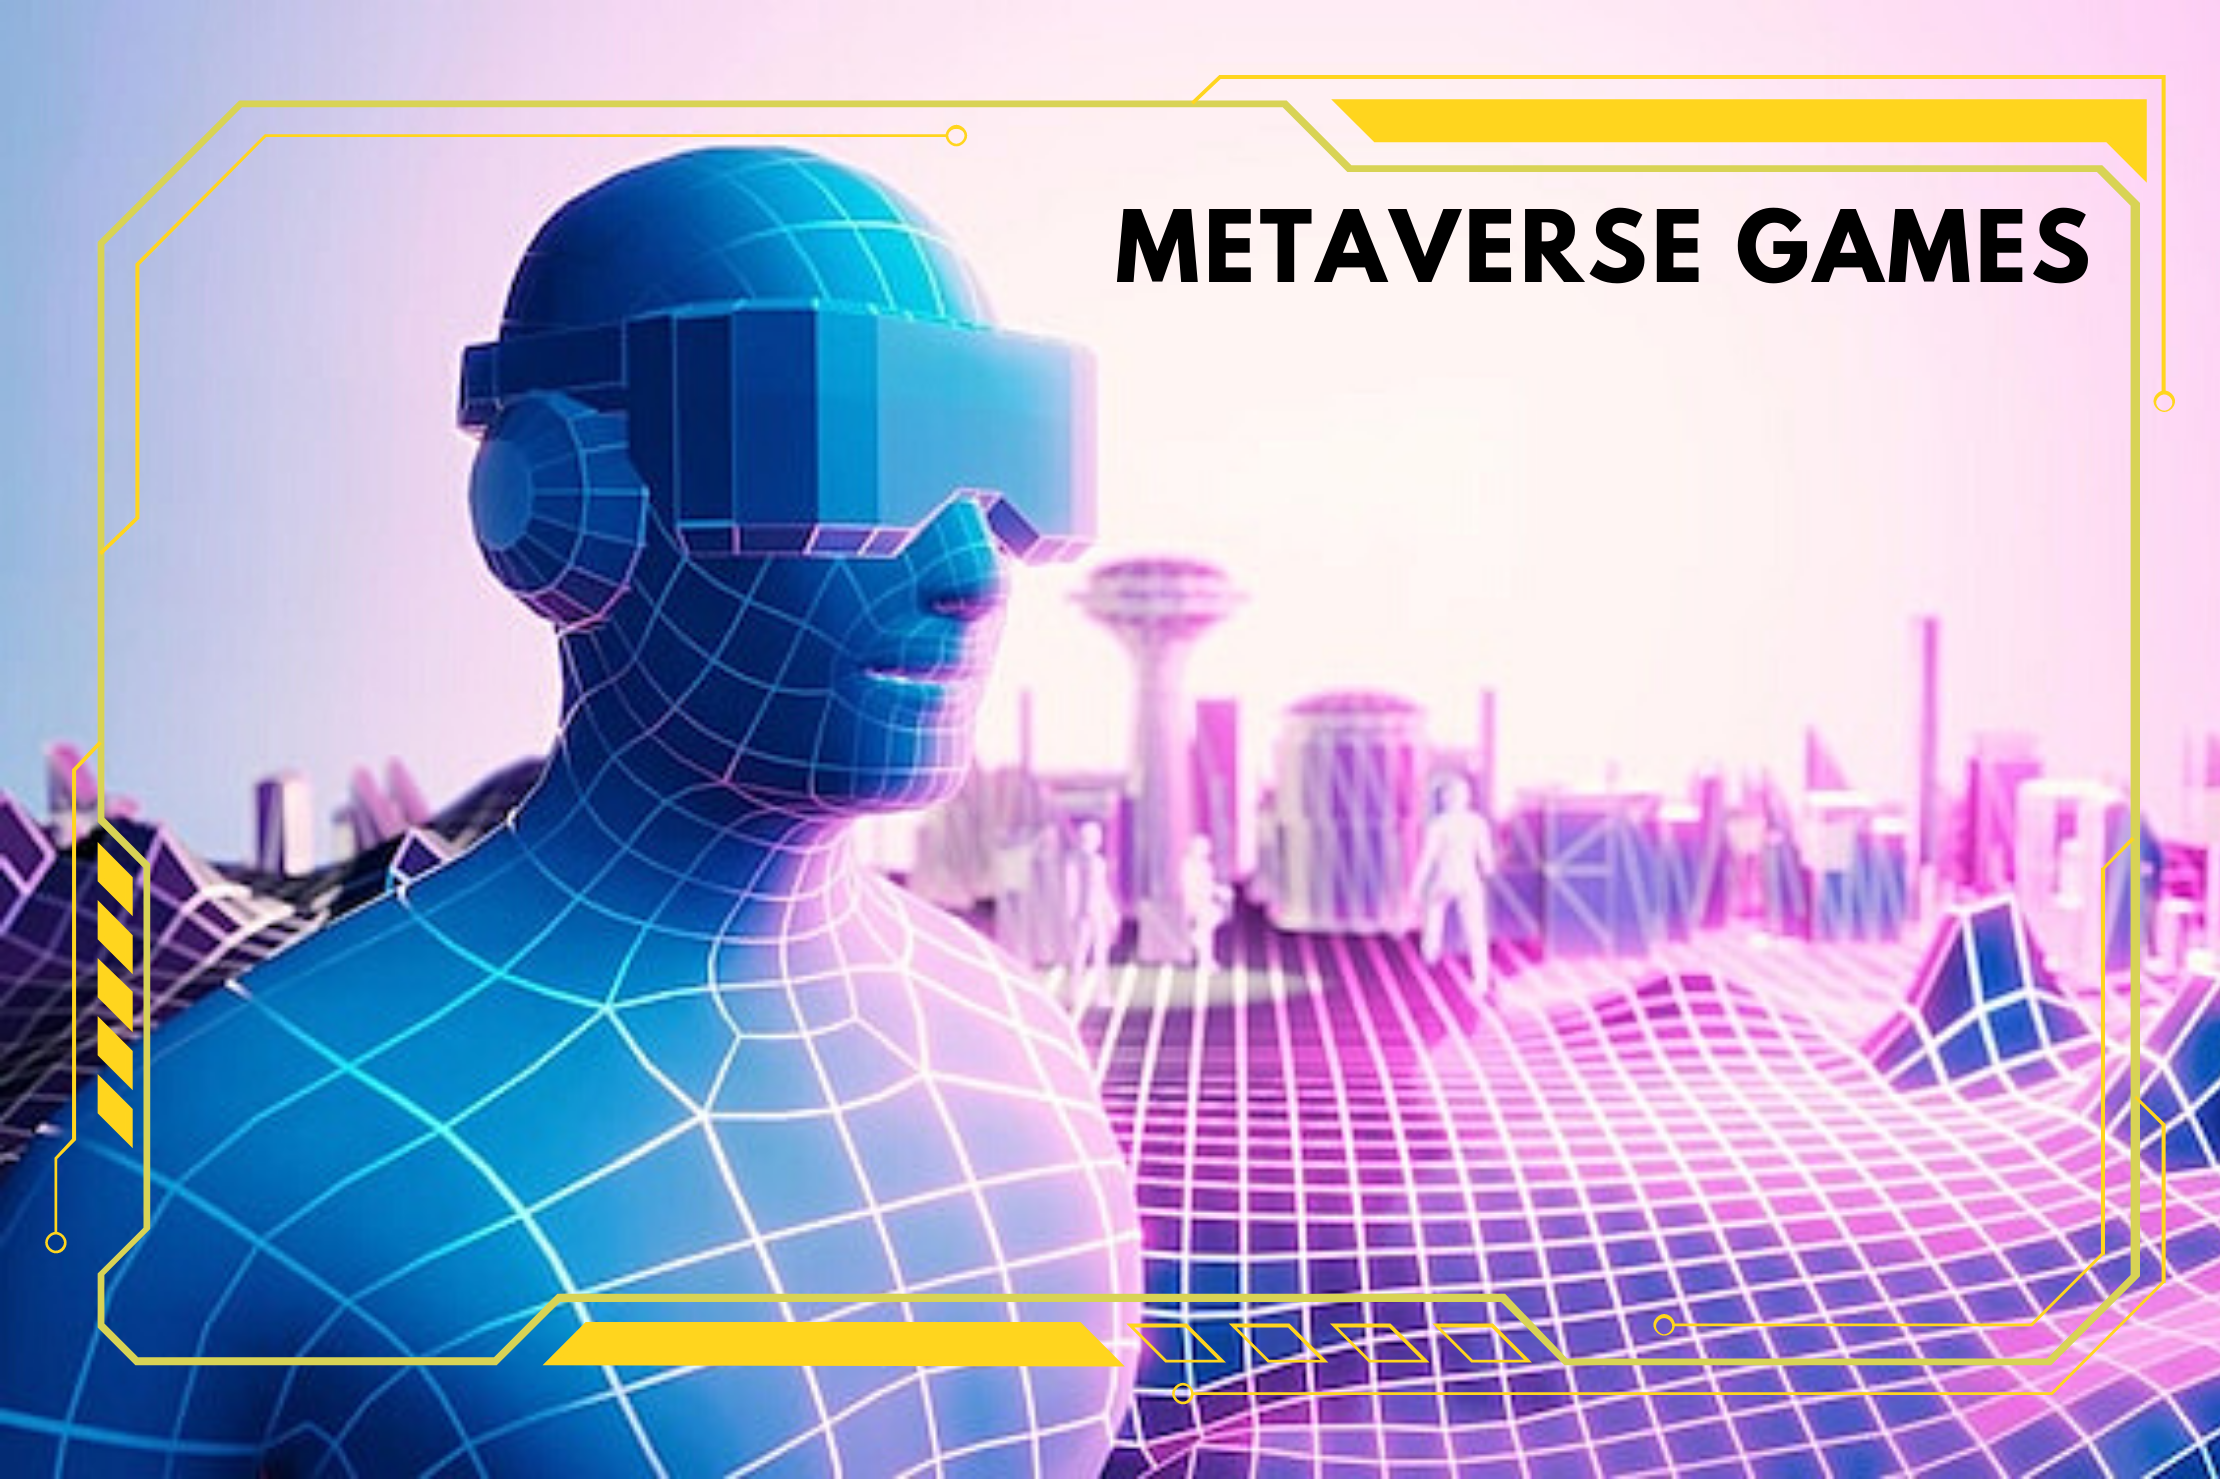 8 VR games based on the Metaverse